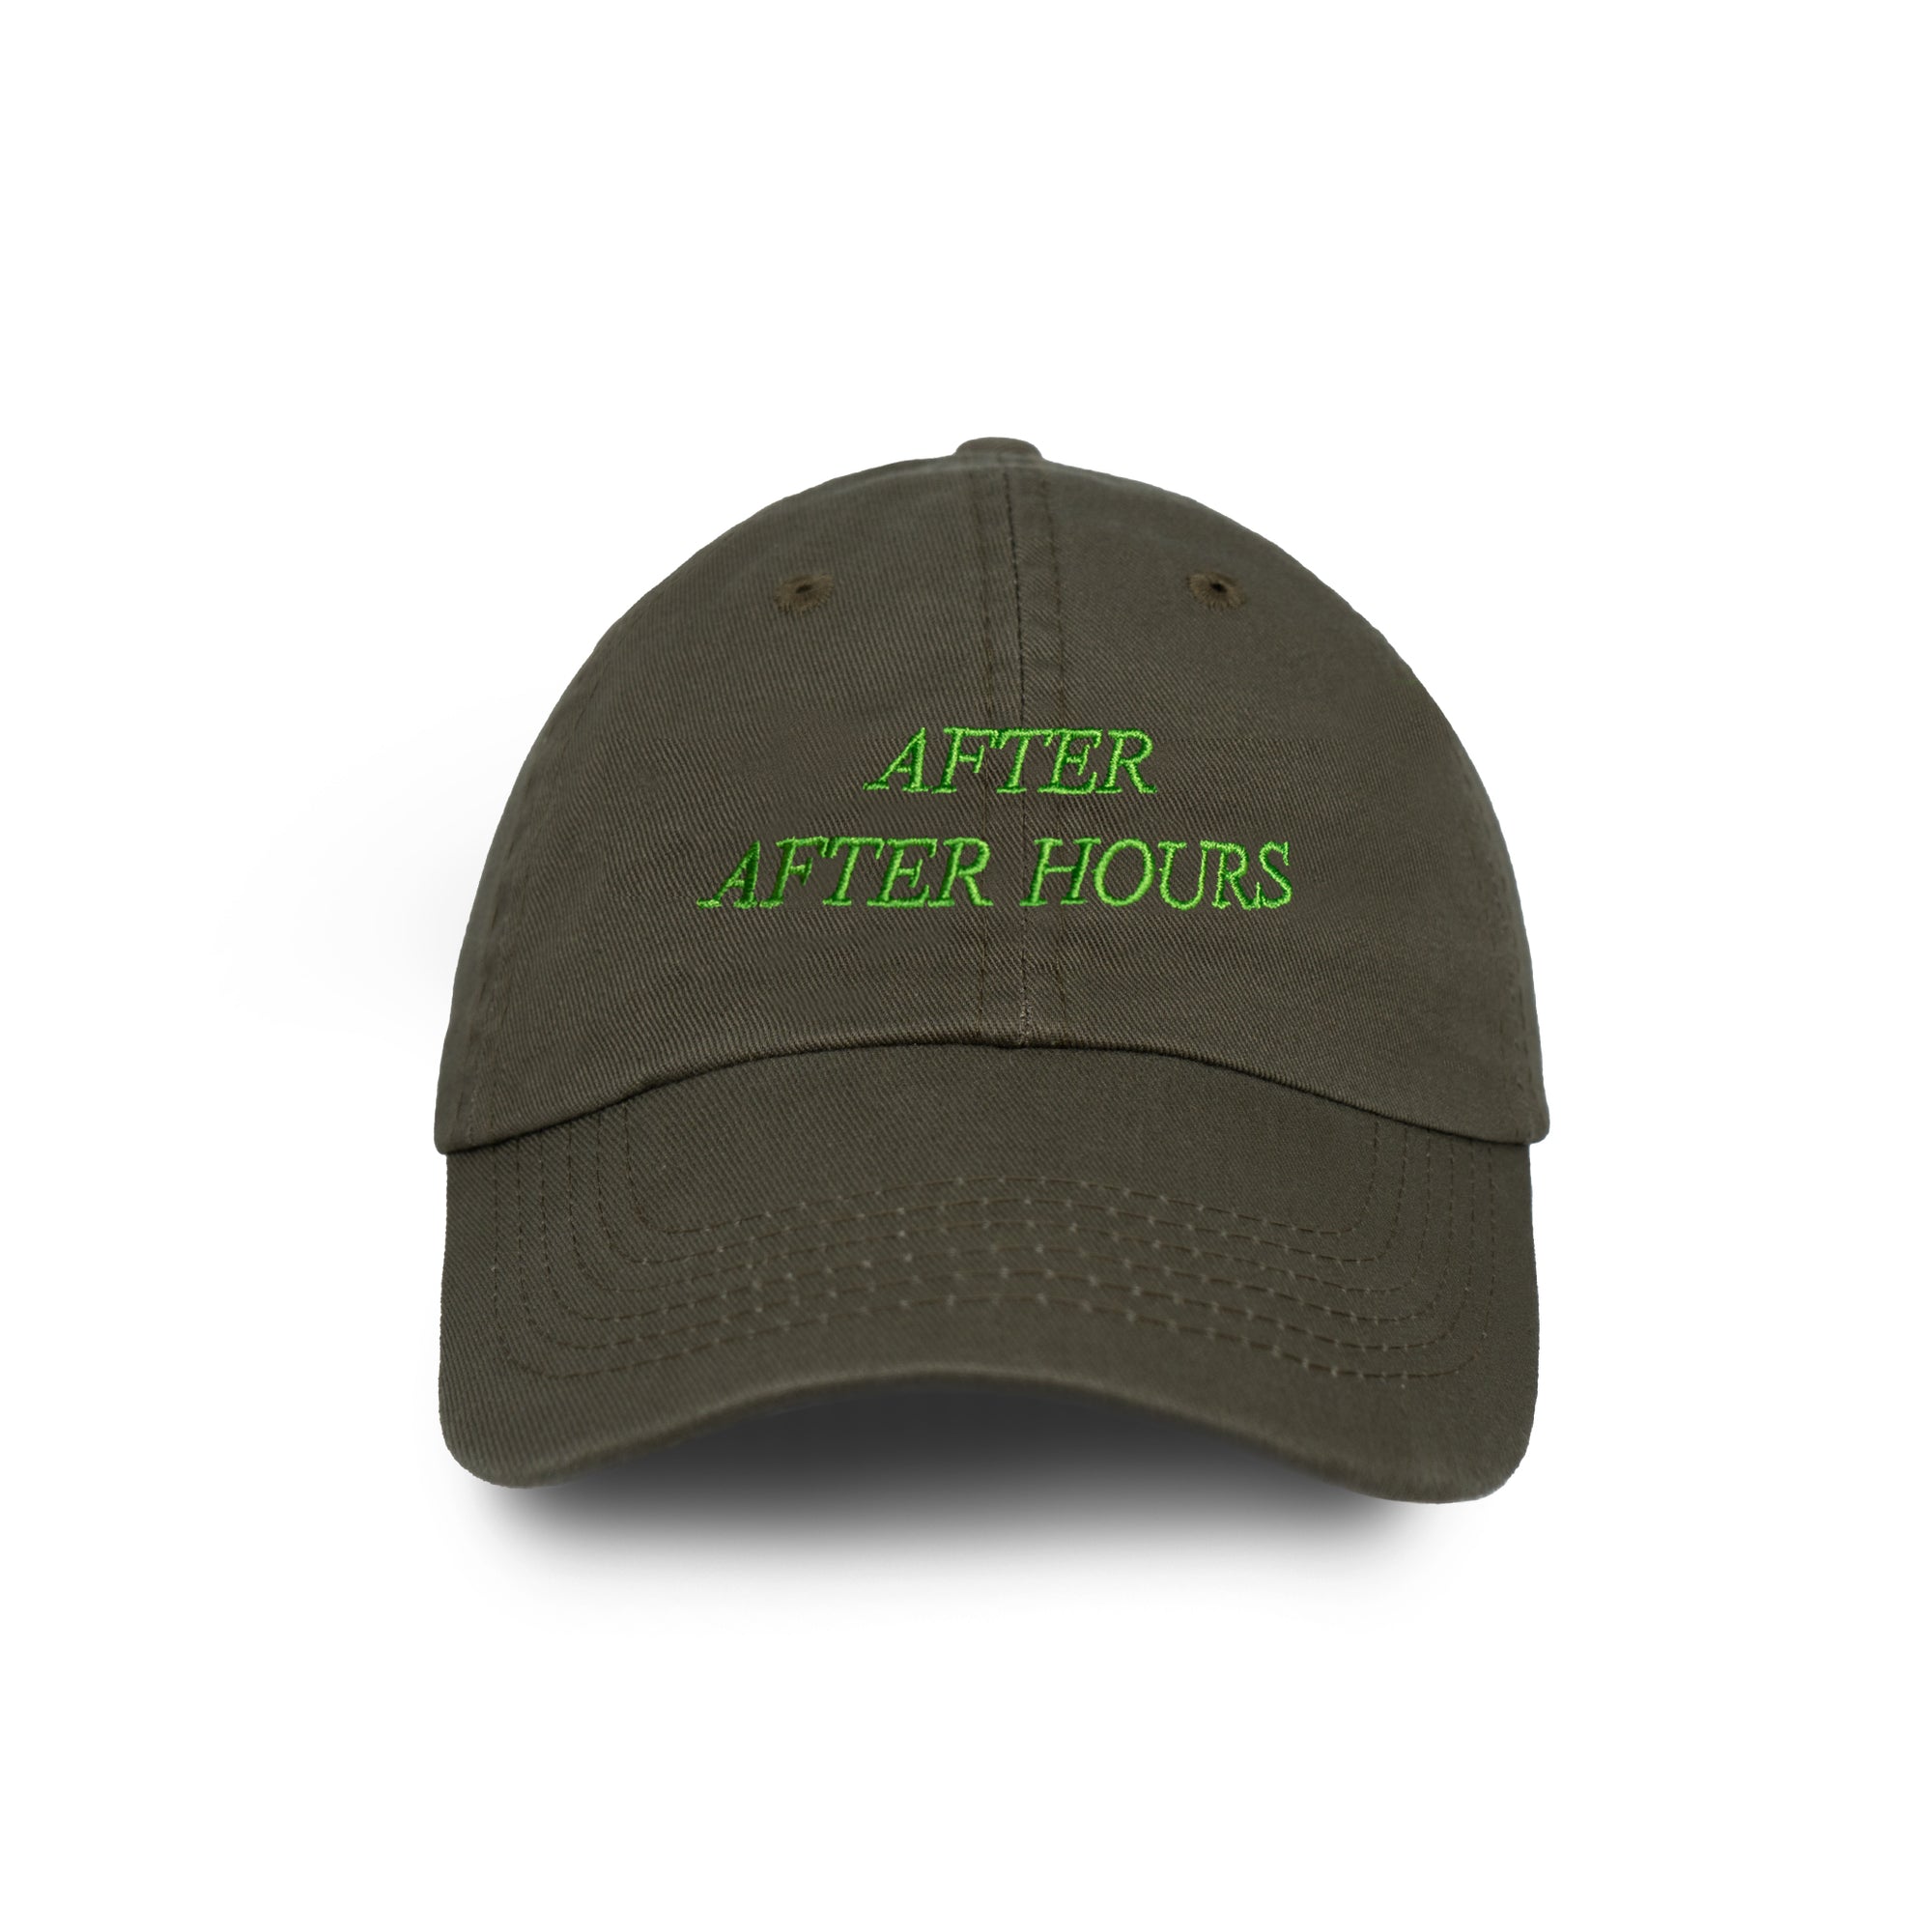 AFTER AFTER HOURS